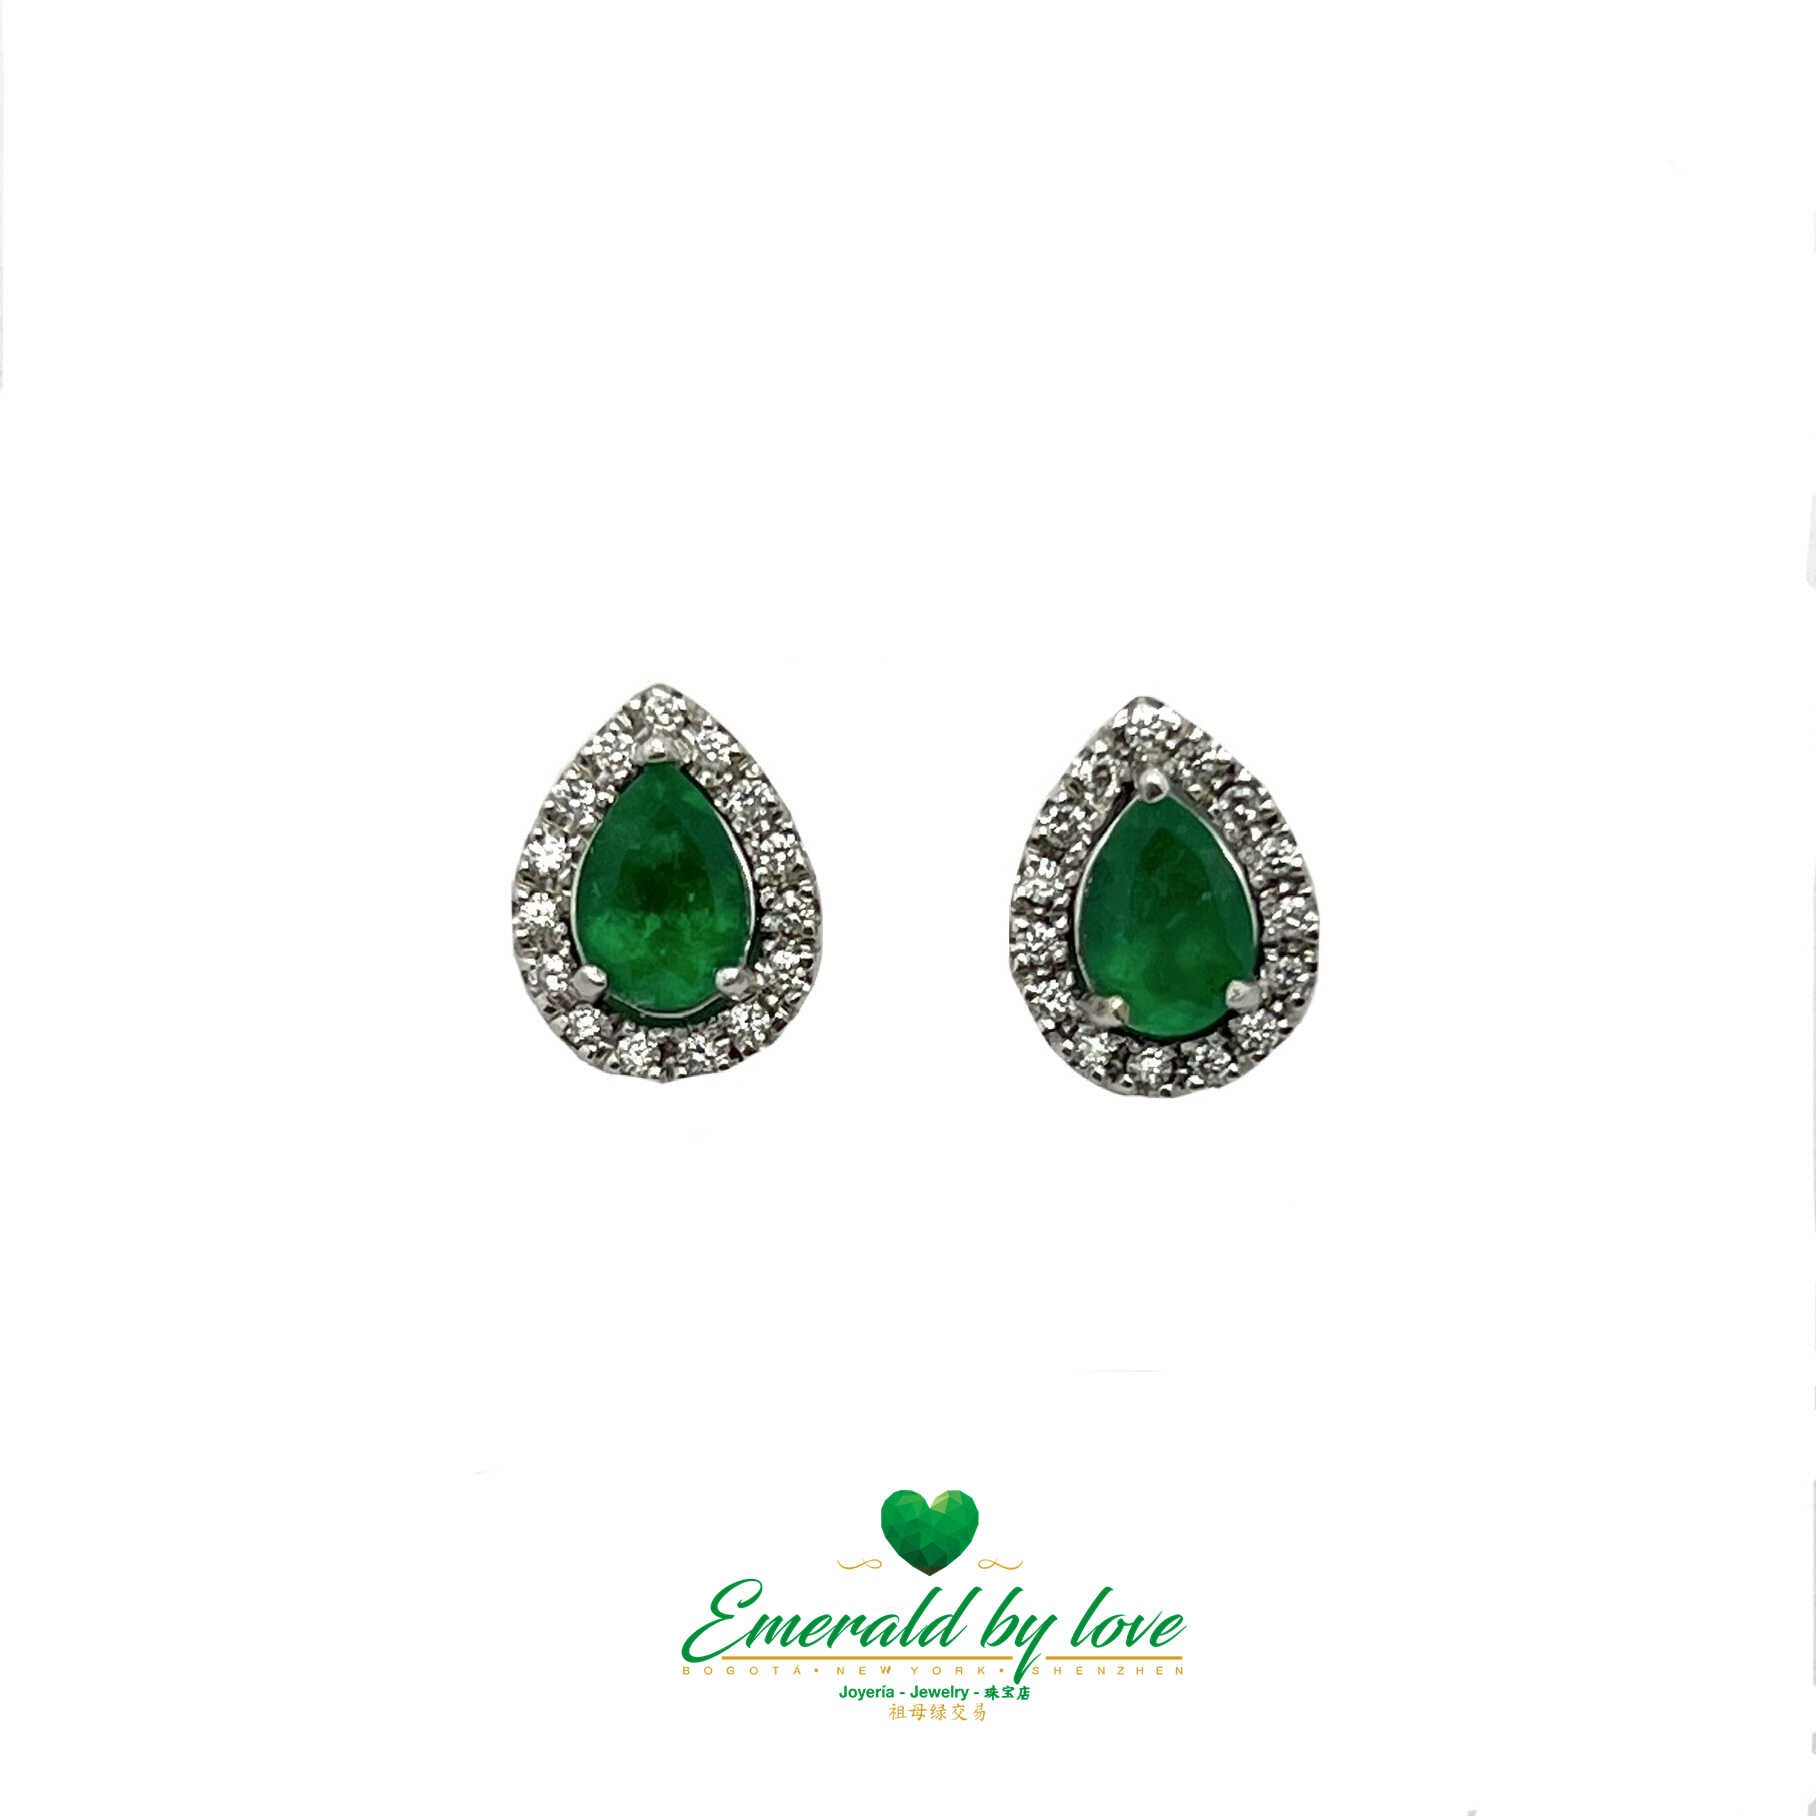 Intriguing Marquise White Gold Earrings with 1.2 ct Teardrop Emeralds and 0.3 tcw Diamonds